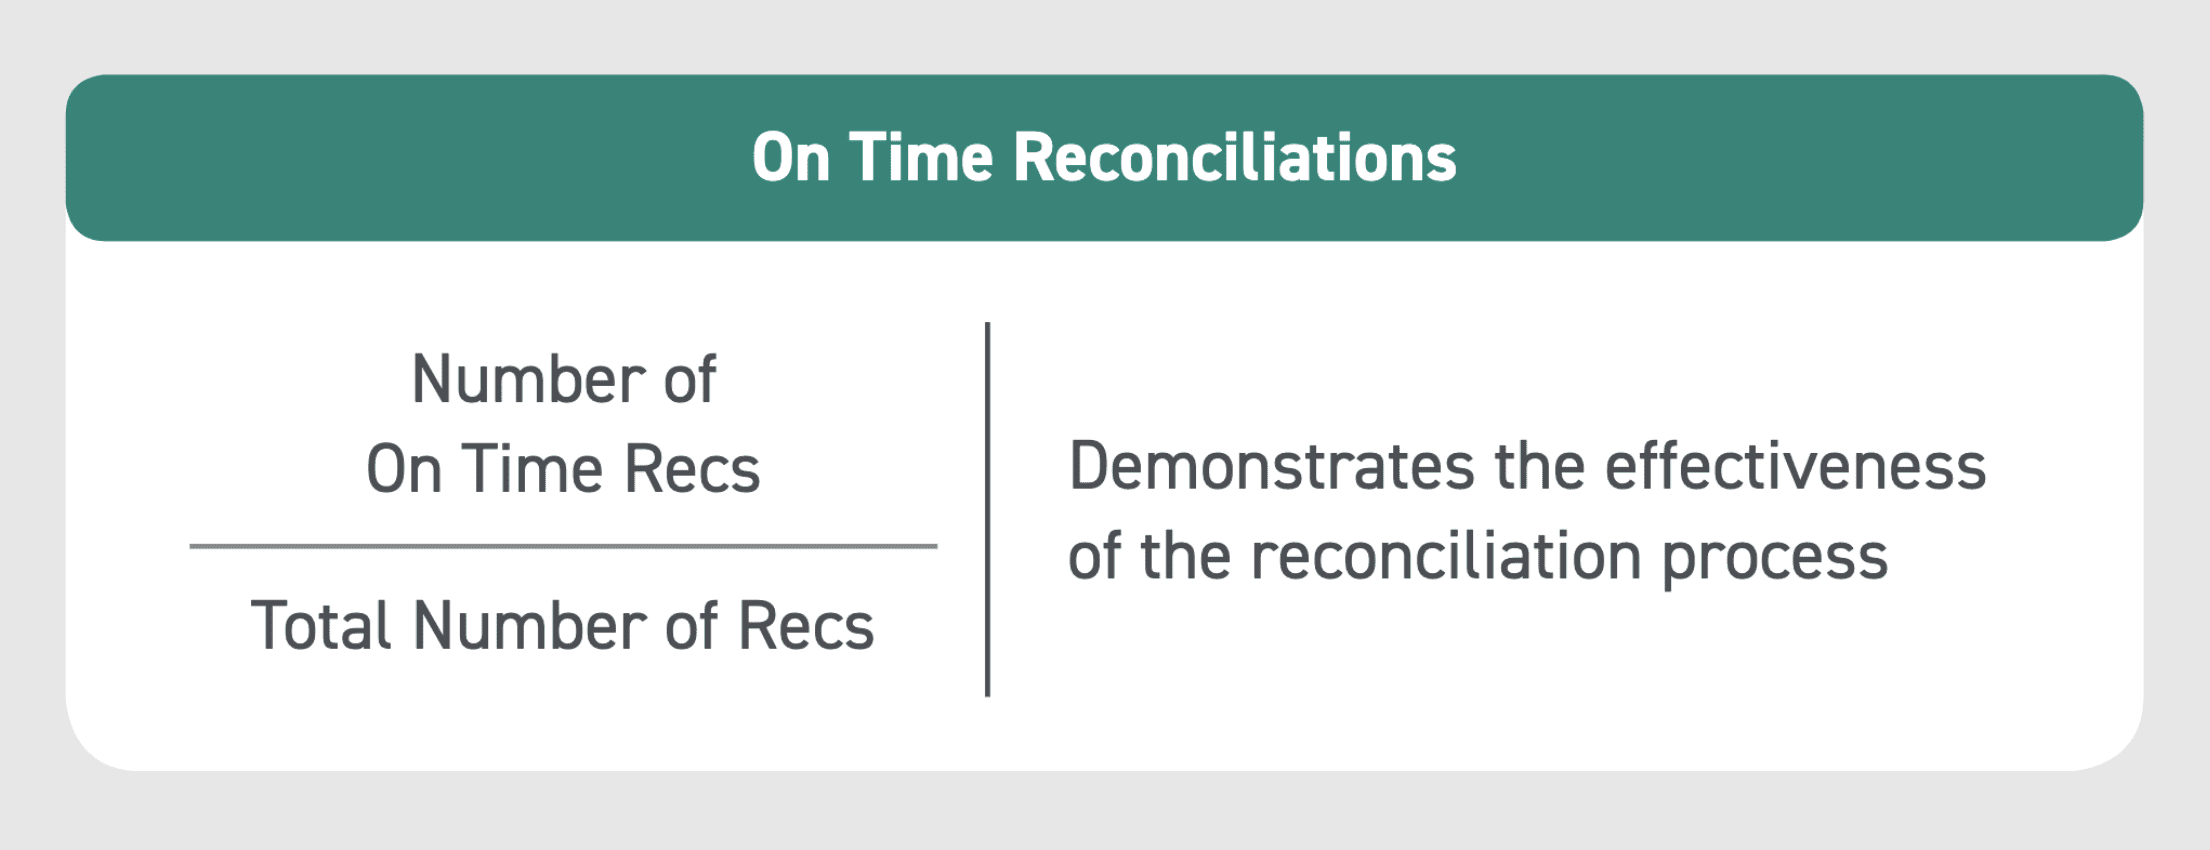 KPI finance and accounting on time reconciliations